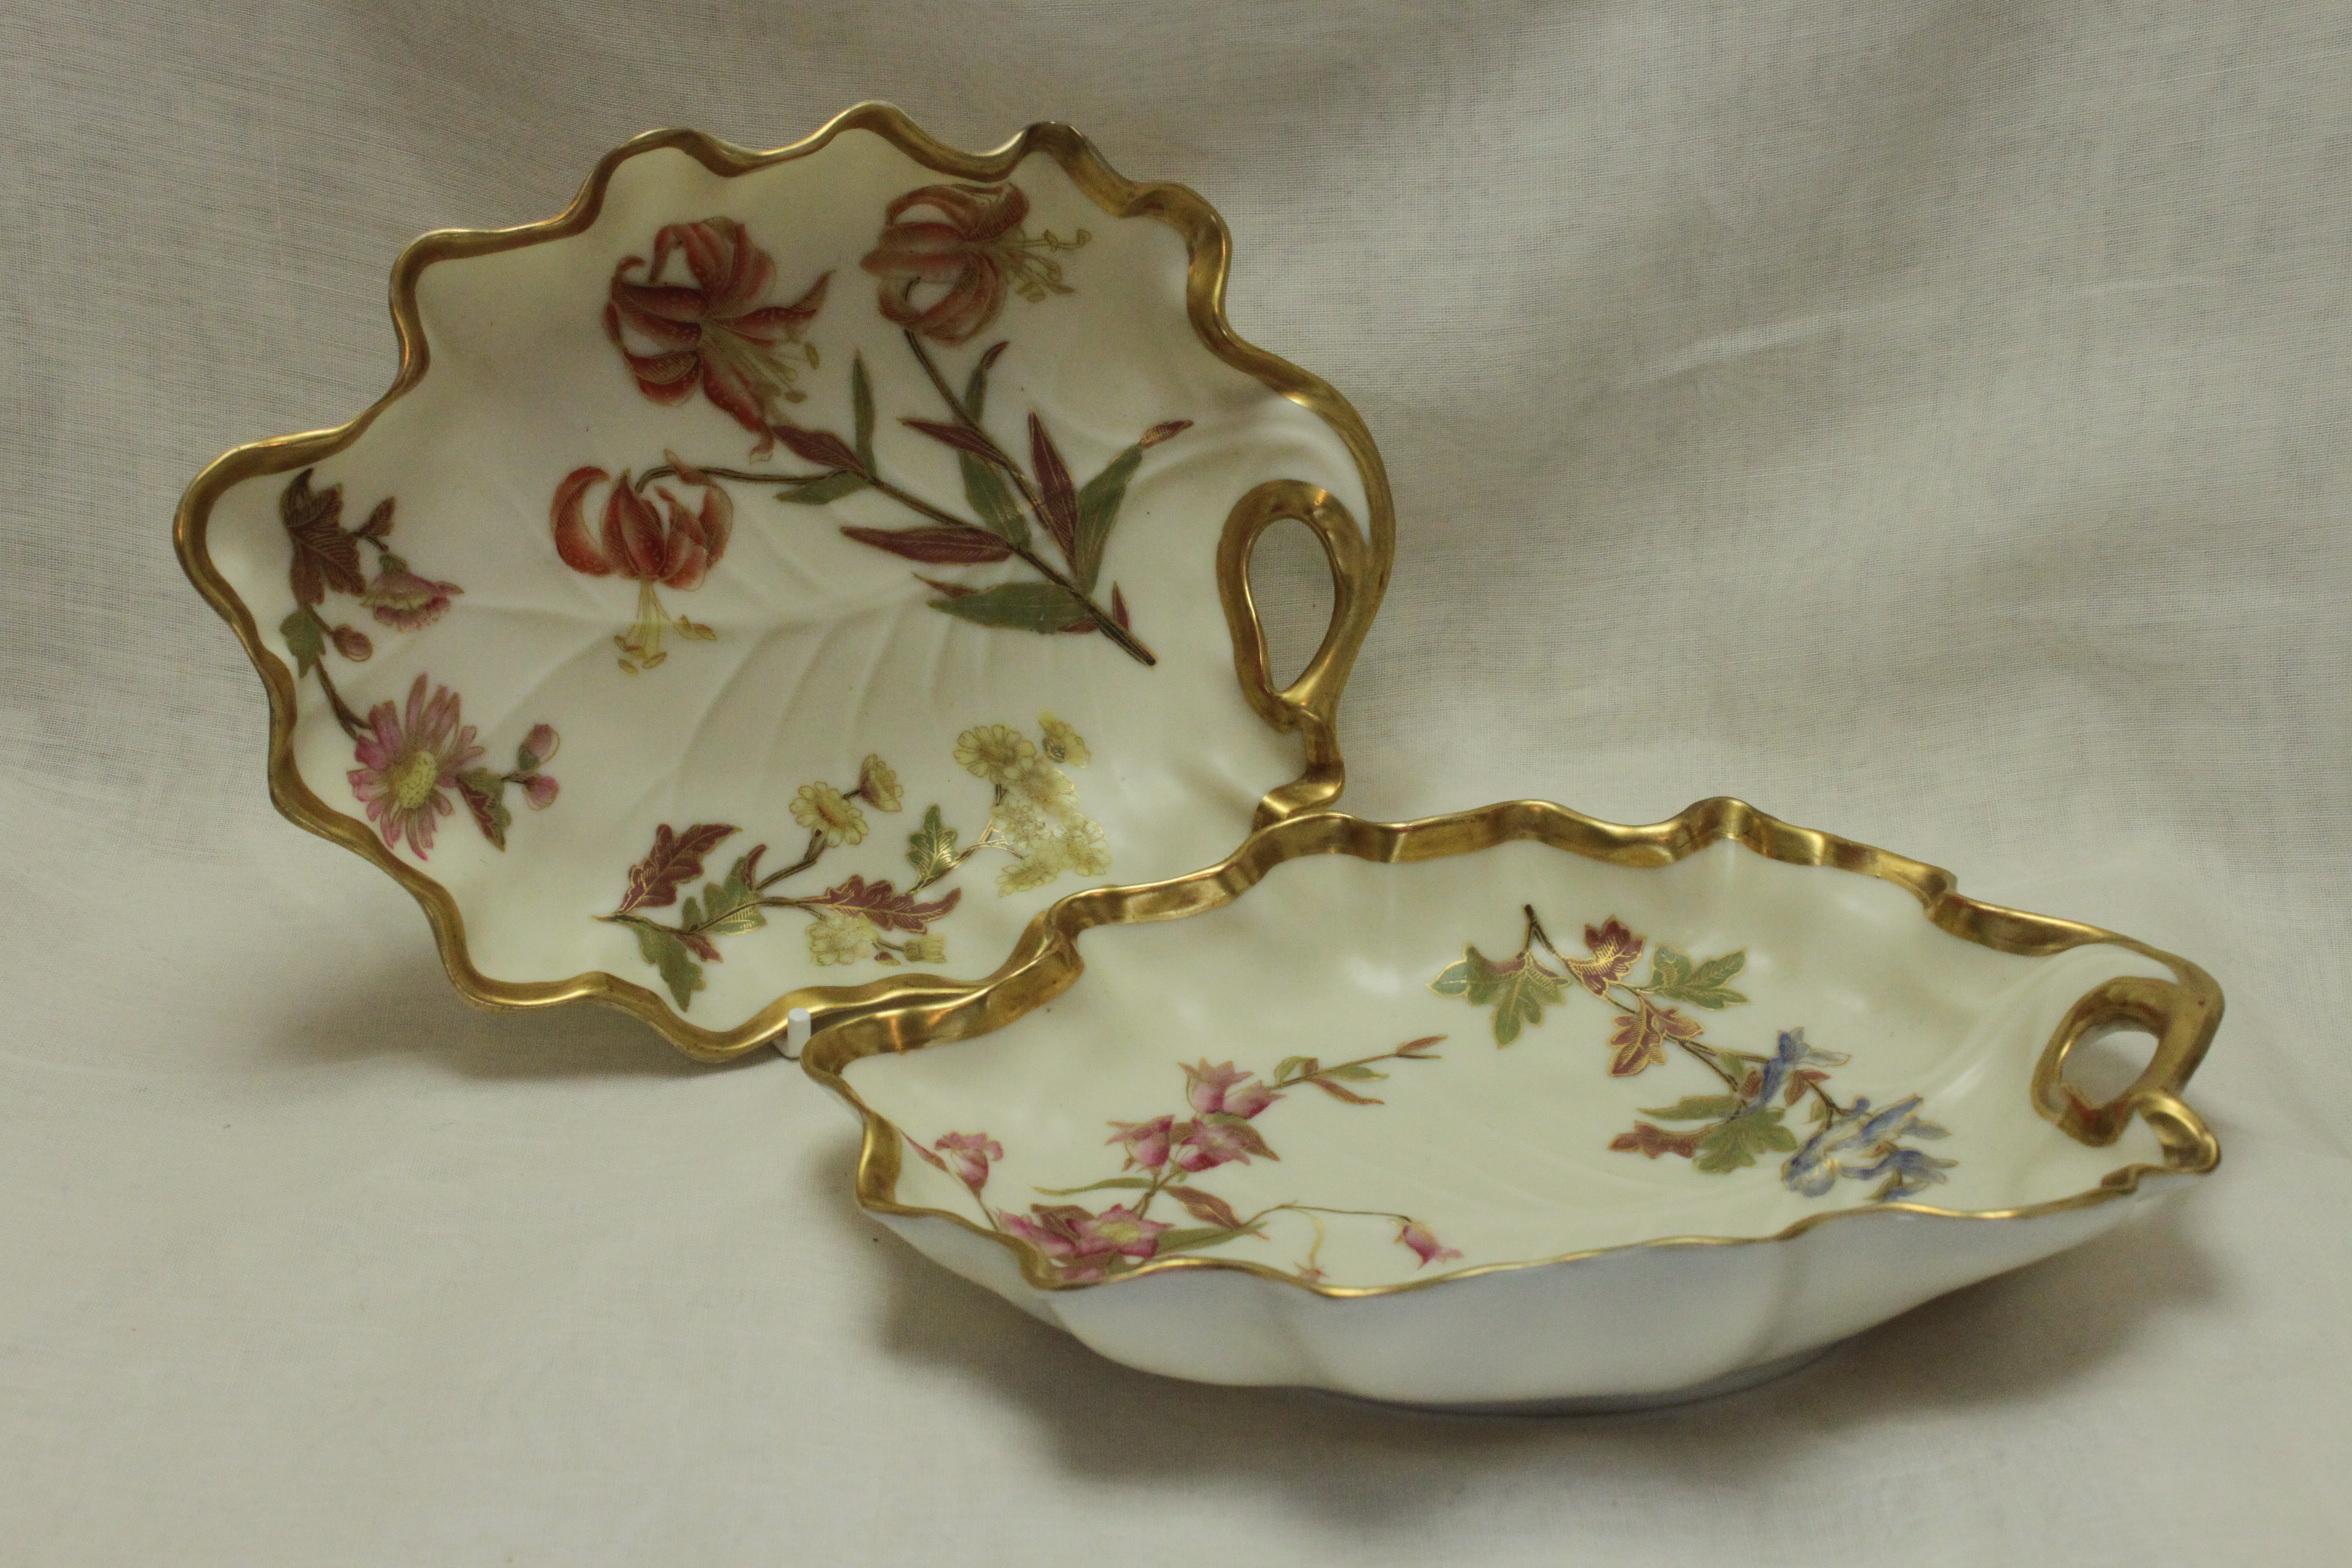 These very pretty porcelain dishes were part of Royal Worcester's Blush Ivory range. The decoration on the creamy Blush Ivory ground consists of a variety of hand painted flowers and foliage, all of which have been enhanced with very delicate